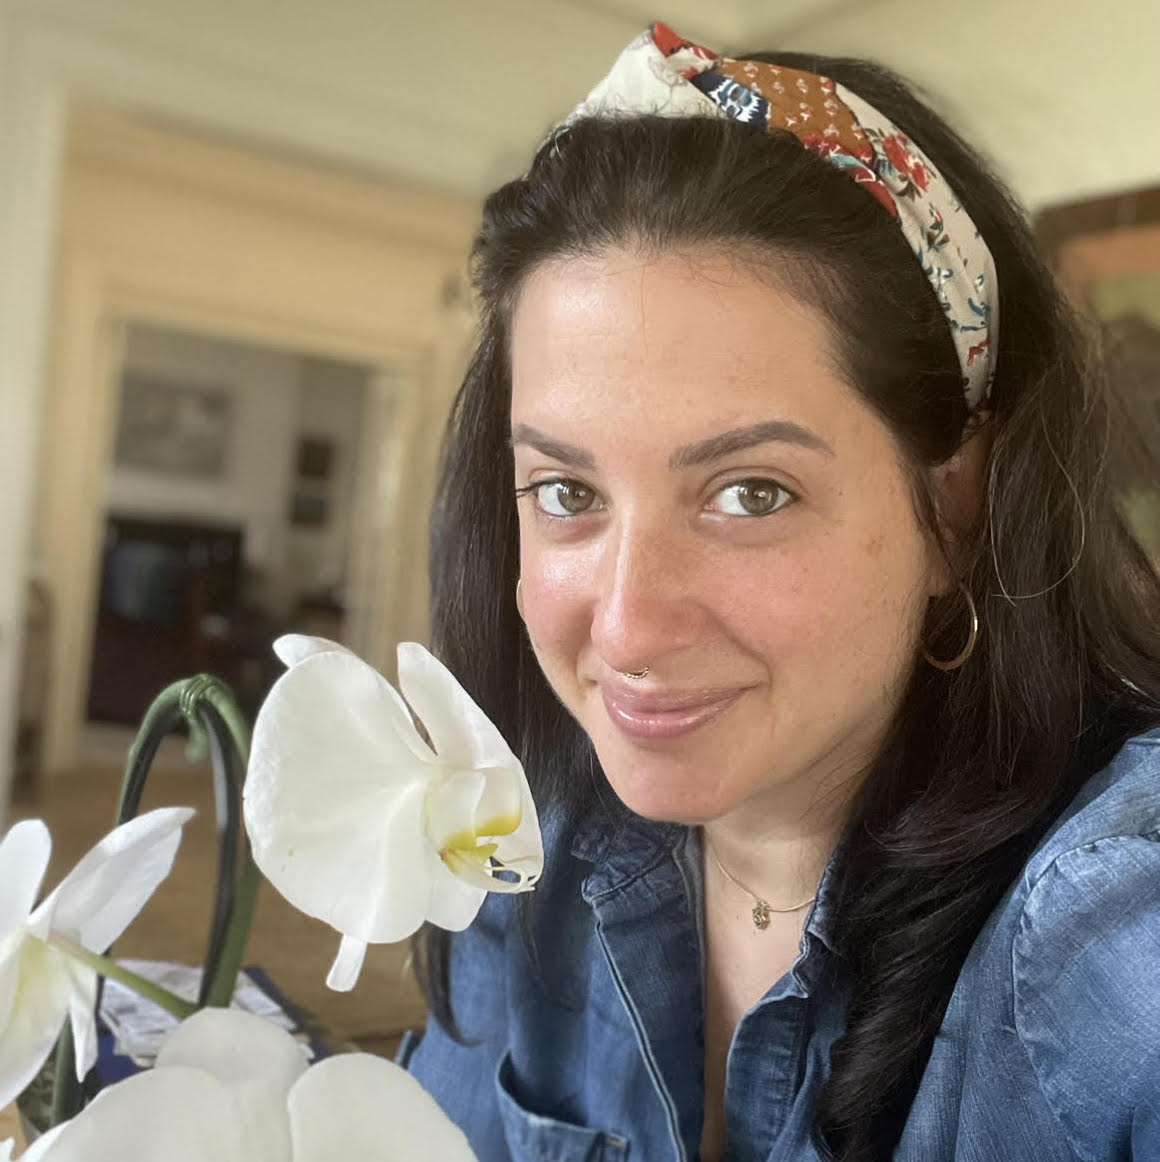 A woman with a headband on holding flowers.